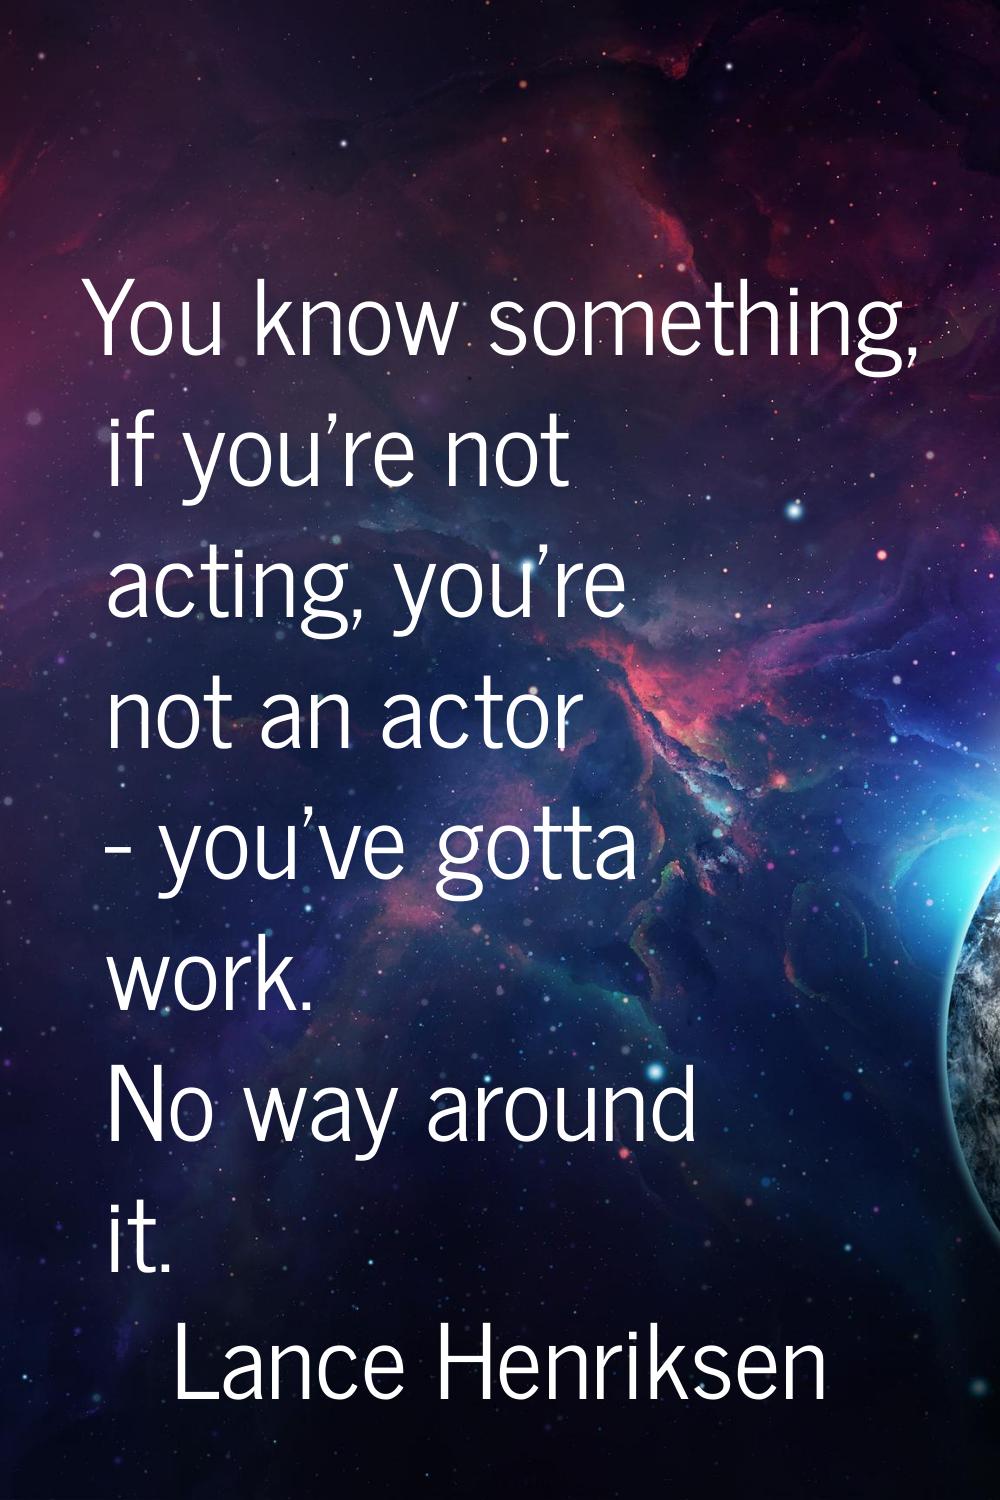 You know something, if you're not acting, you're not an actor - you've gotta work. No way around it